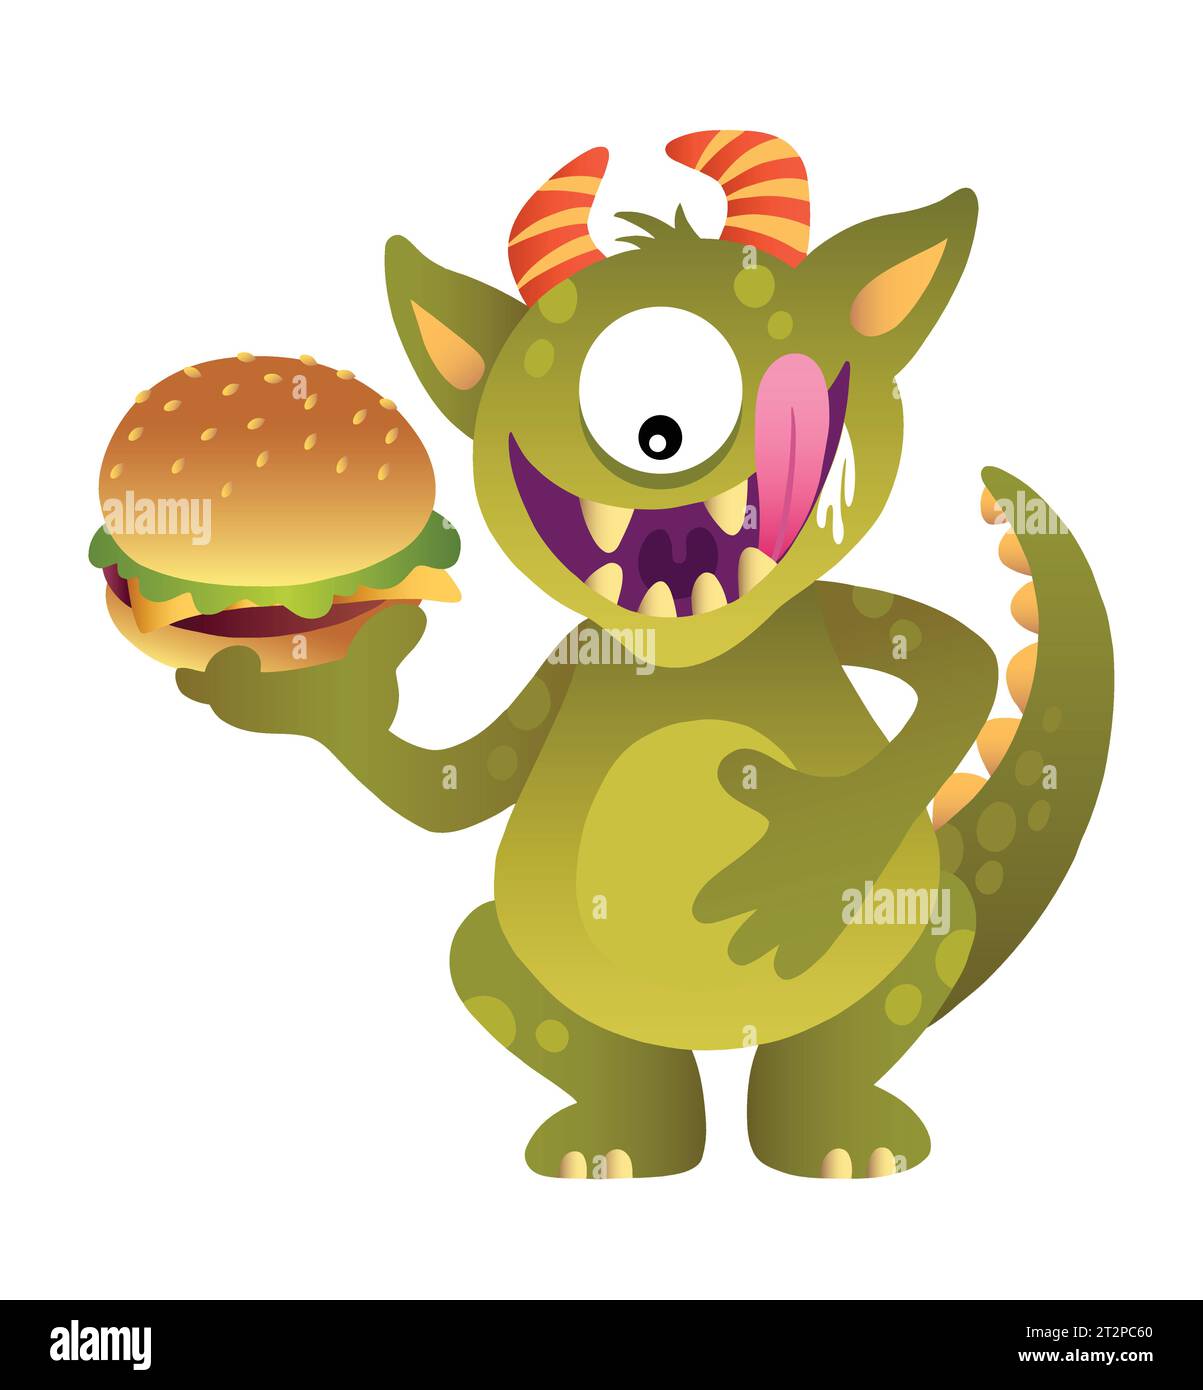 colorful cartoon monster character for game or mascot illustration Stock Vector